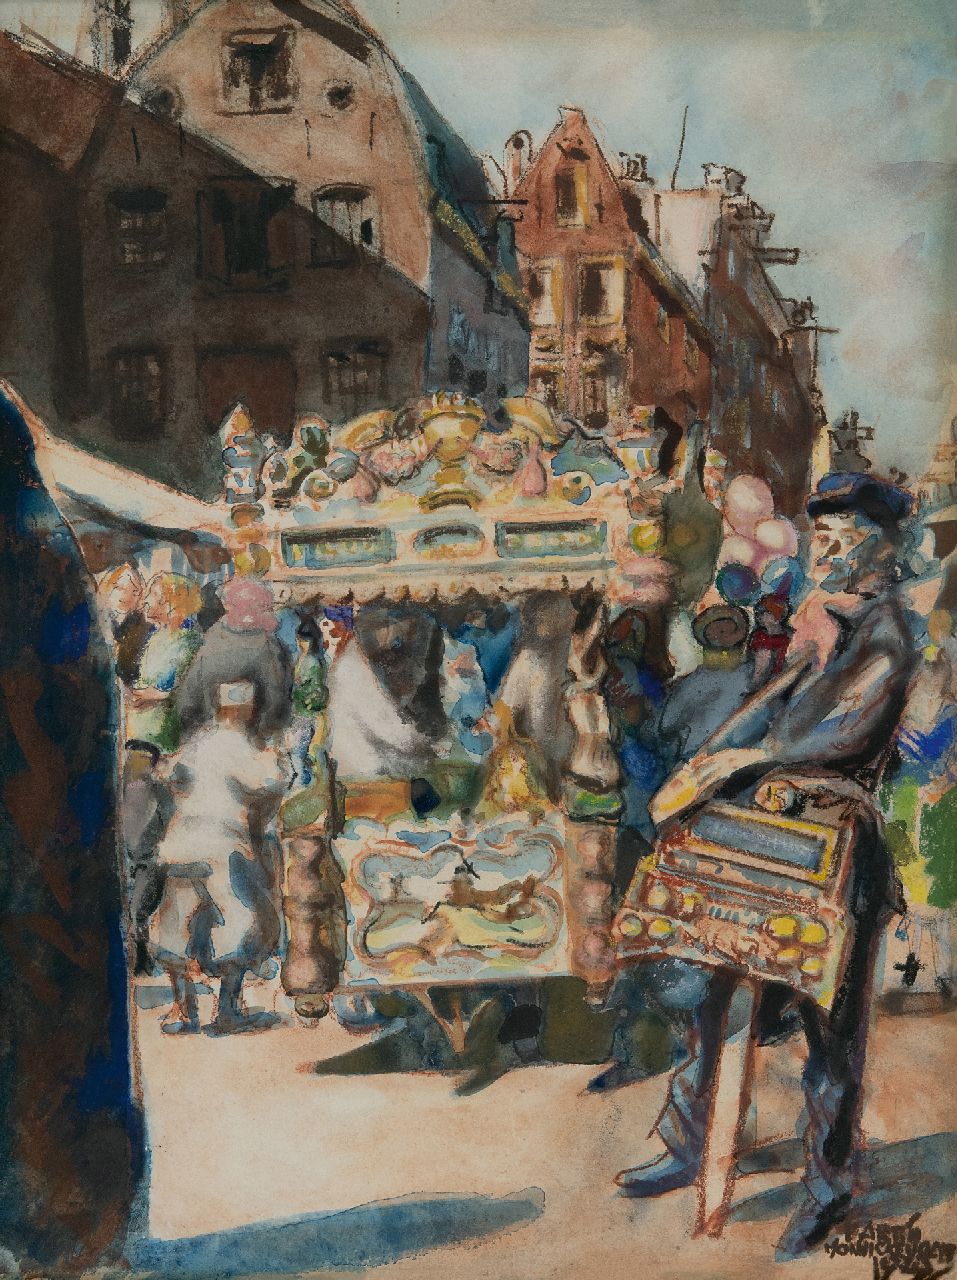 Monnickendam M.  | Martin Monnickendam, Ice cream cart and barrel organ at the Waterlooplein in Amsterdam, pastel and watercolour on paper 38.5 x 29.0 cm, signed l.r. and dated 1925